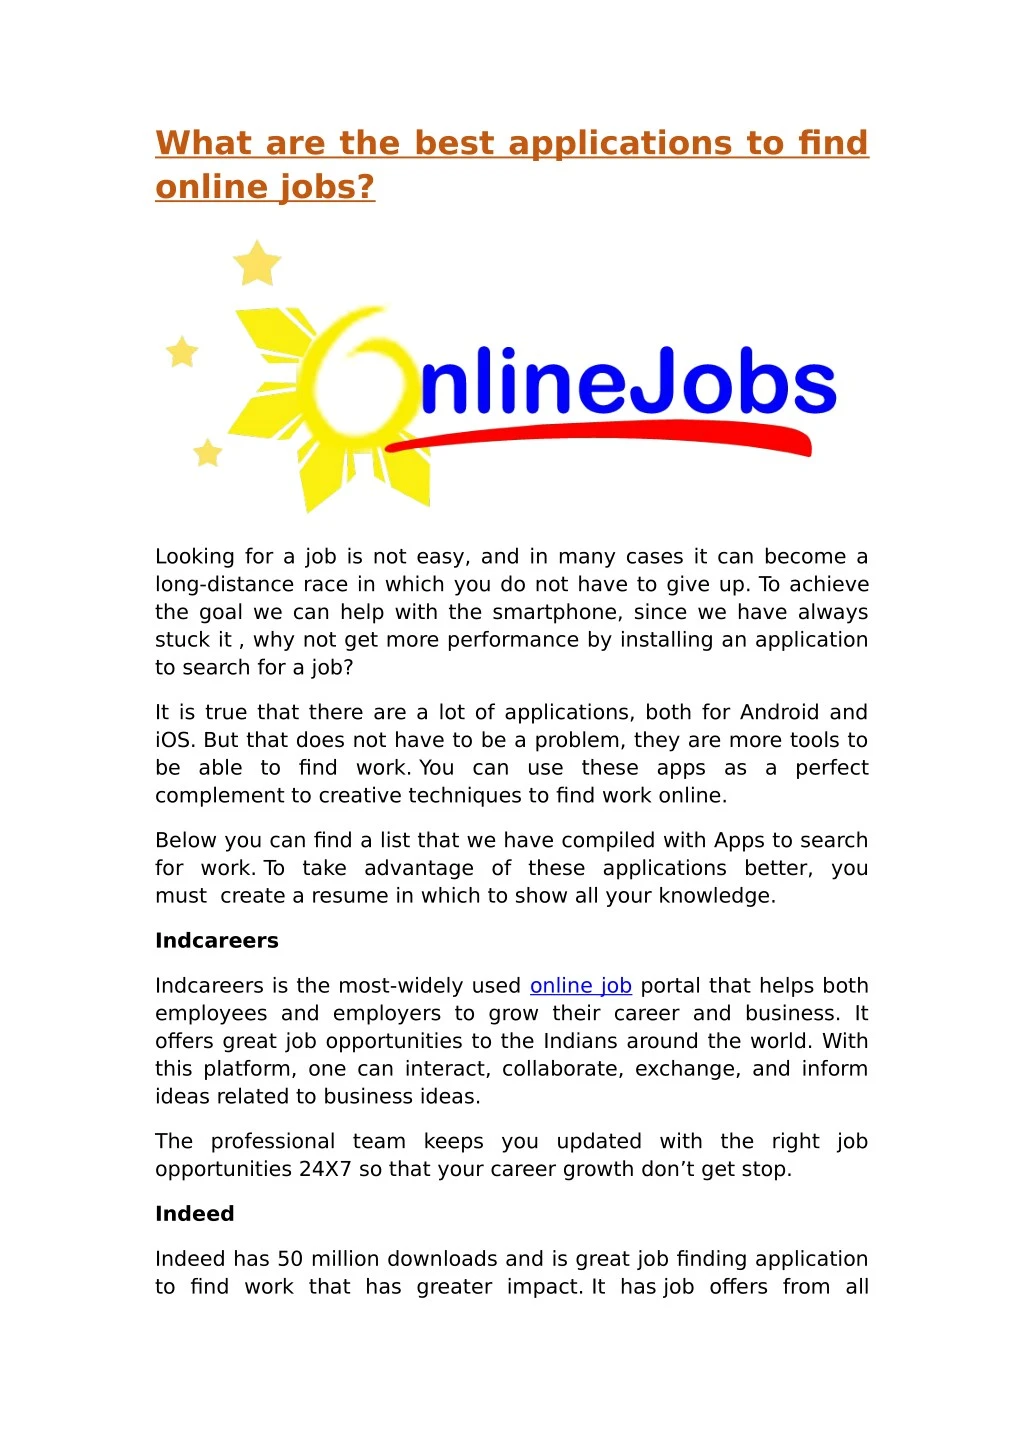 what are the best applications to find online jobs